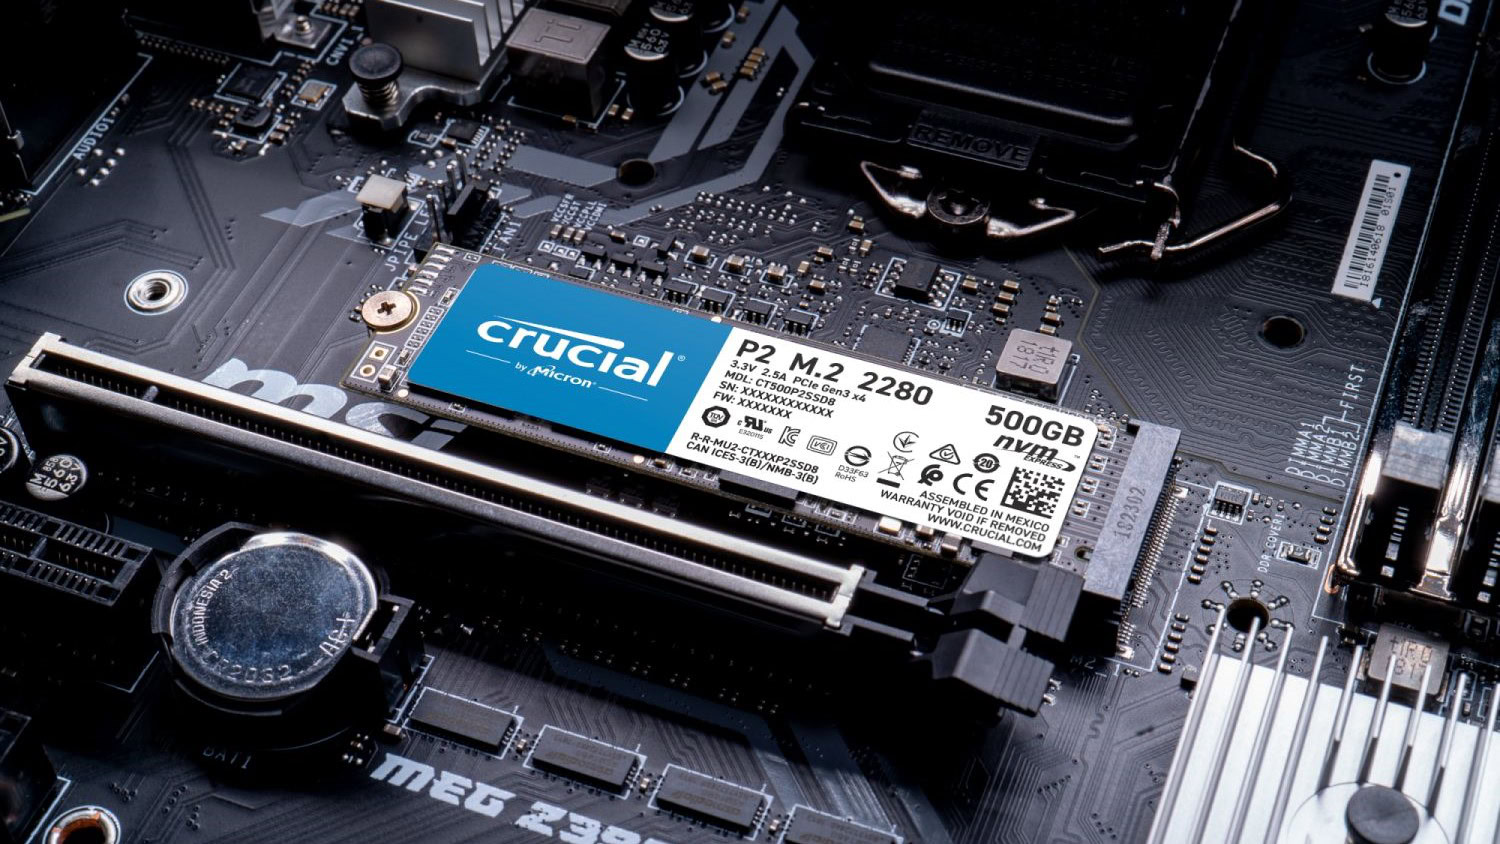 Crucial nvme ssd installed on a motherboard